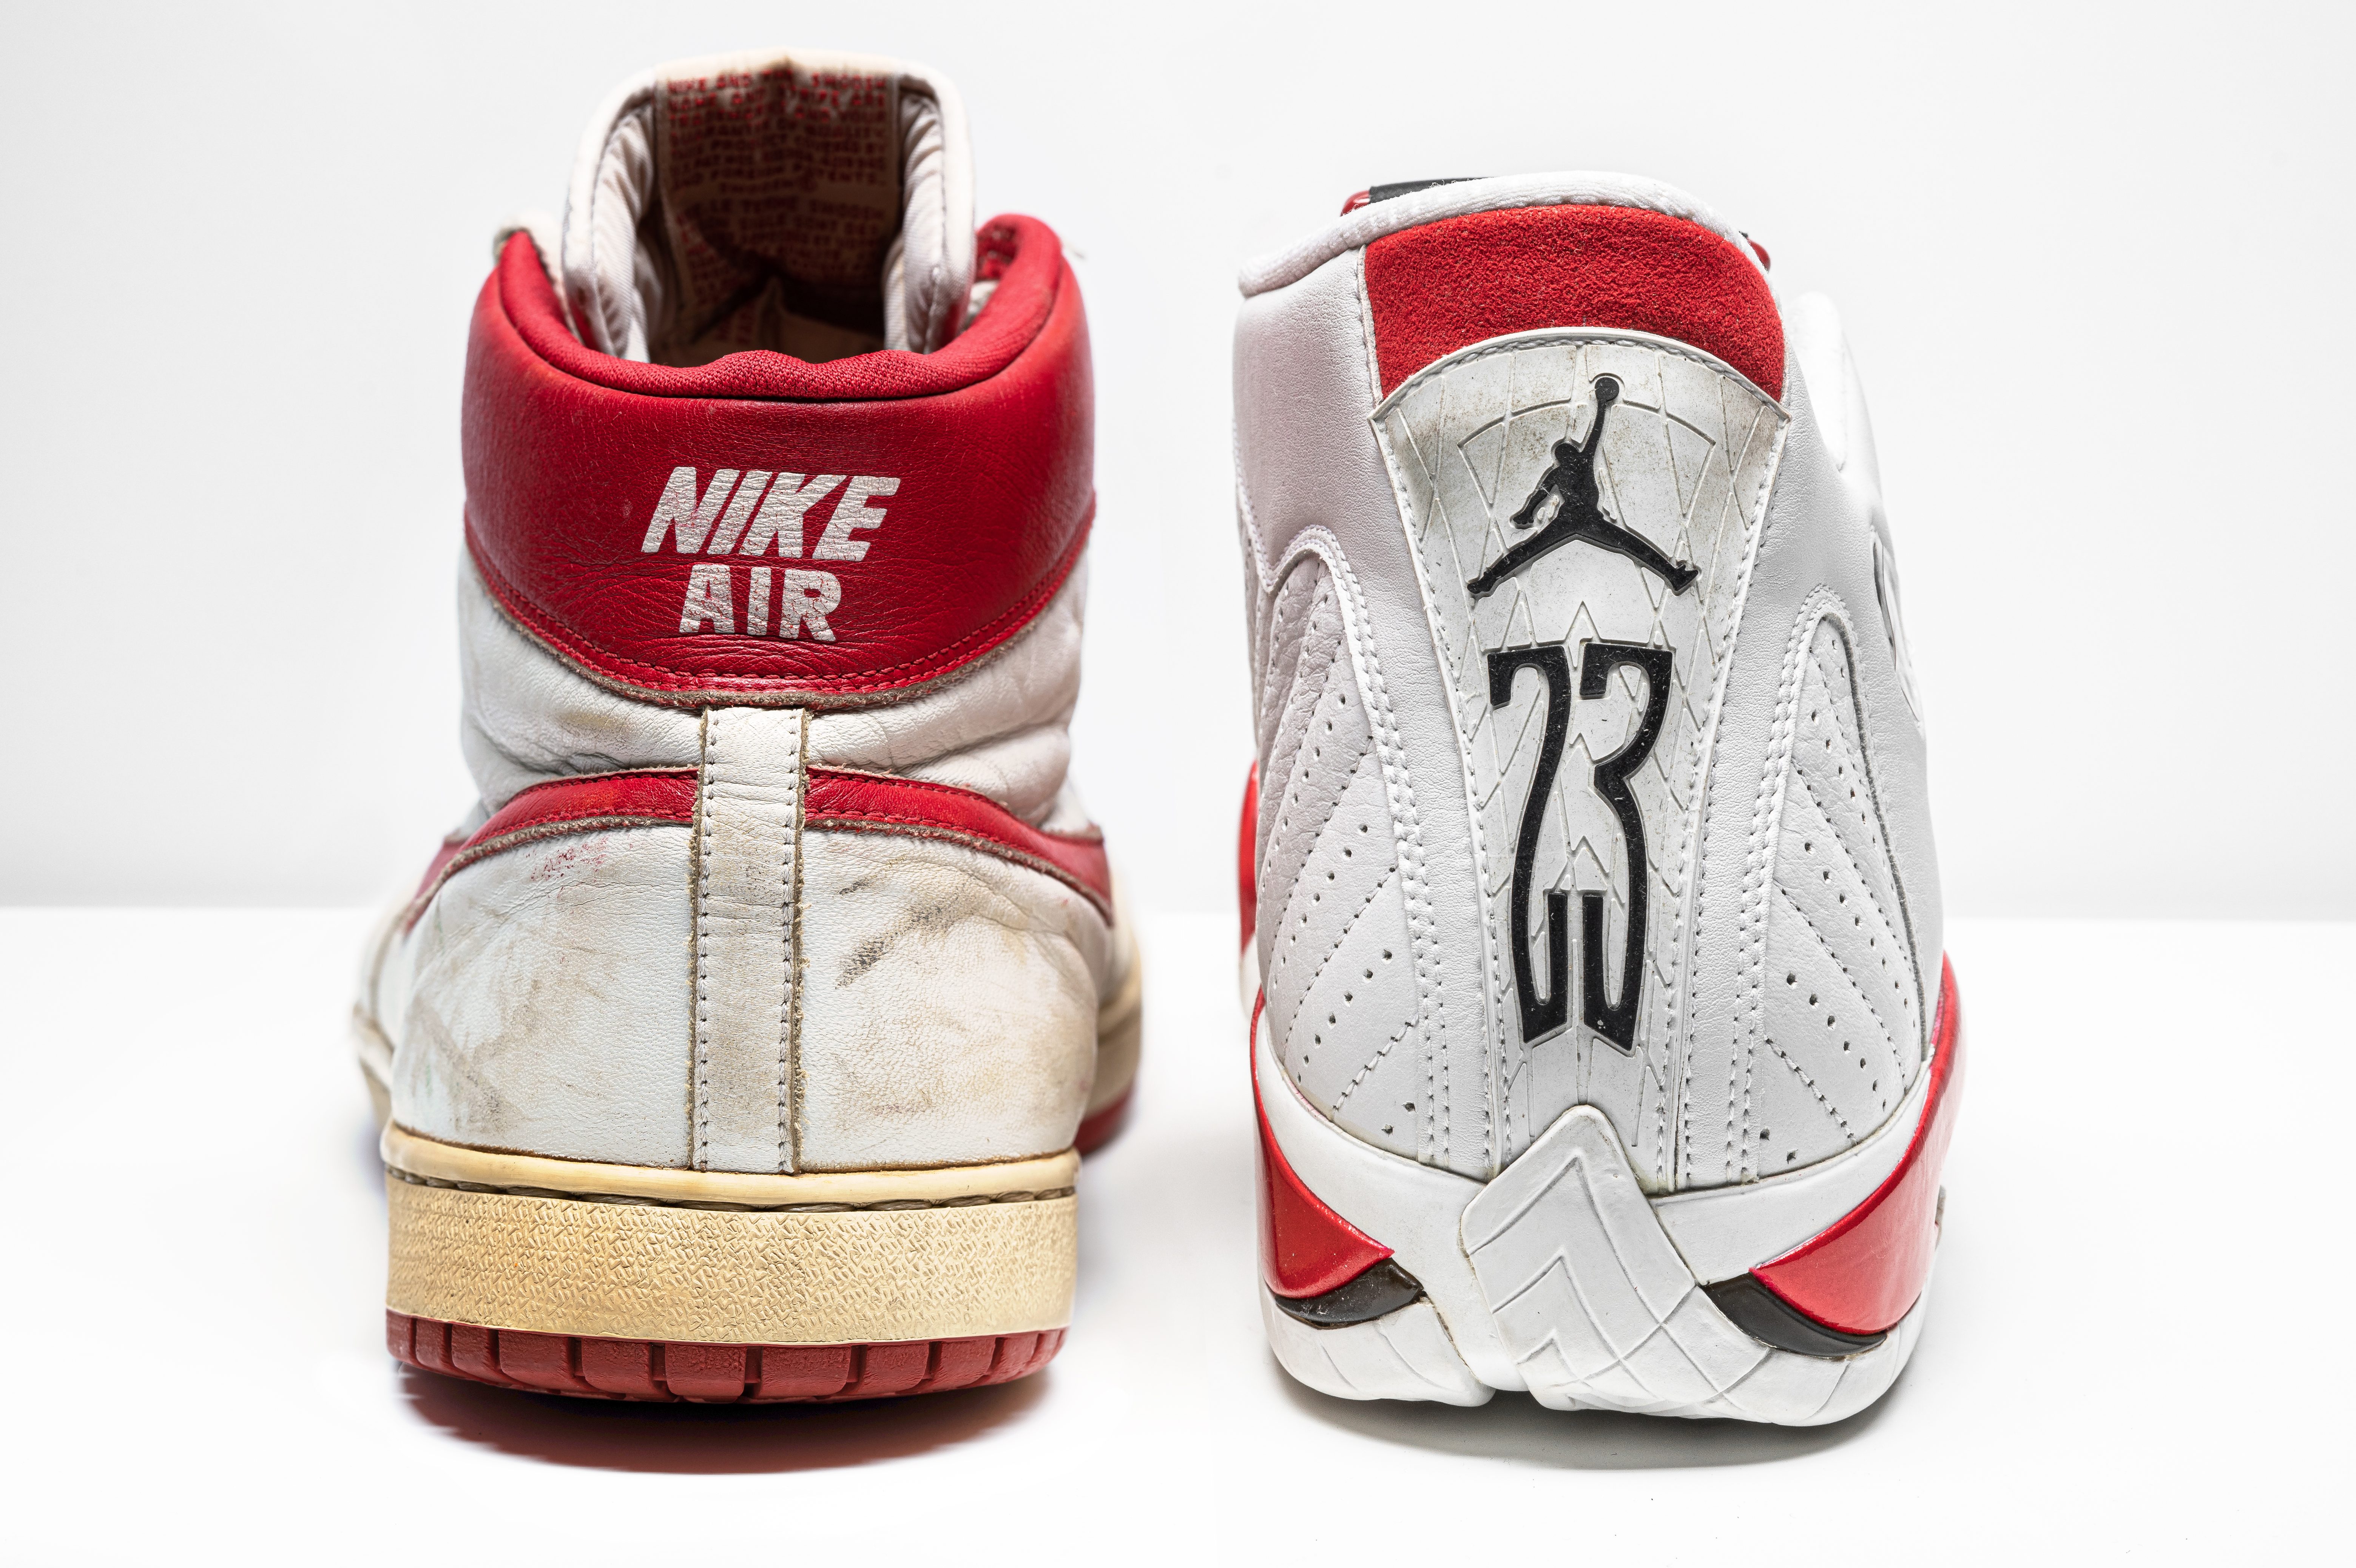 Two unmatched Jordans that will be available at the The "Original Air: Michael Jordan Game-Worn and Player Exclusive Sneaker Rarities" auction.